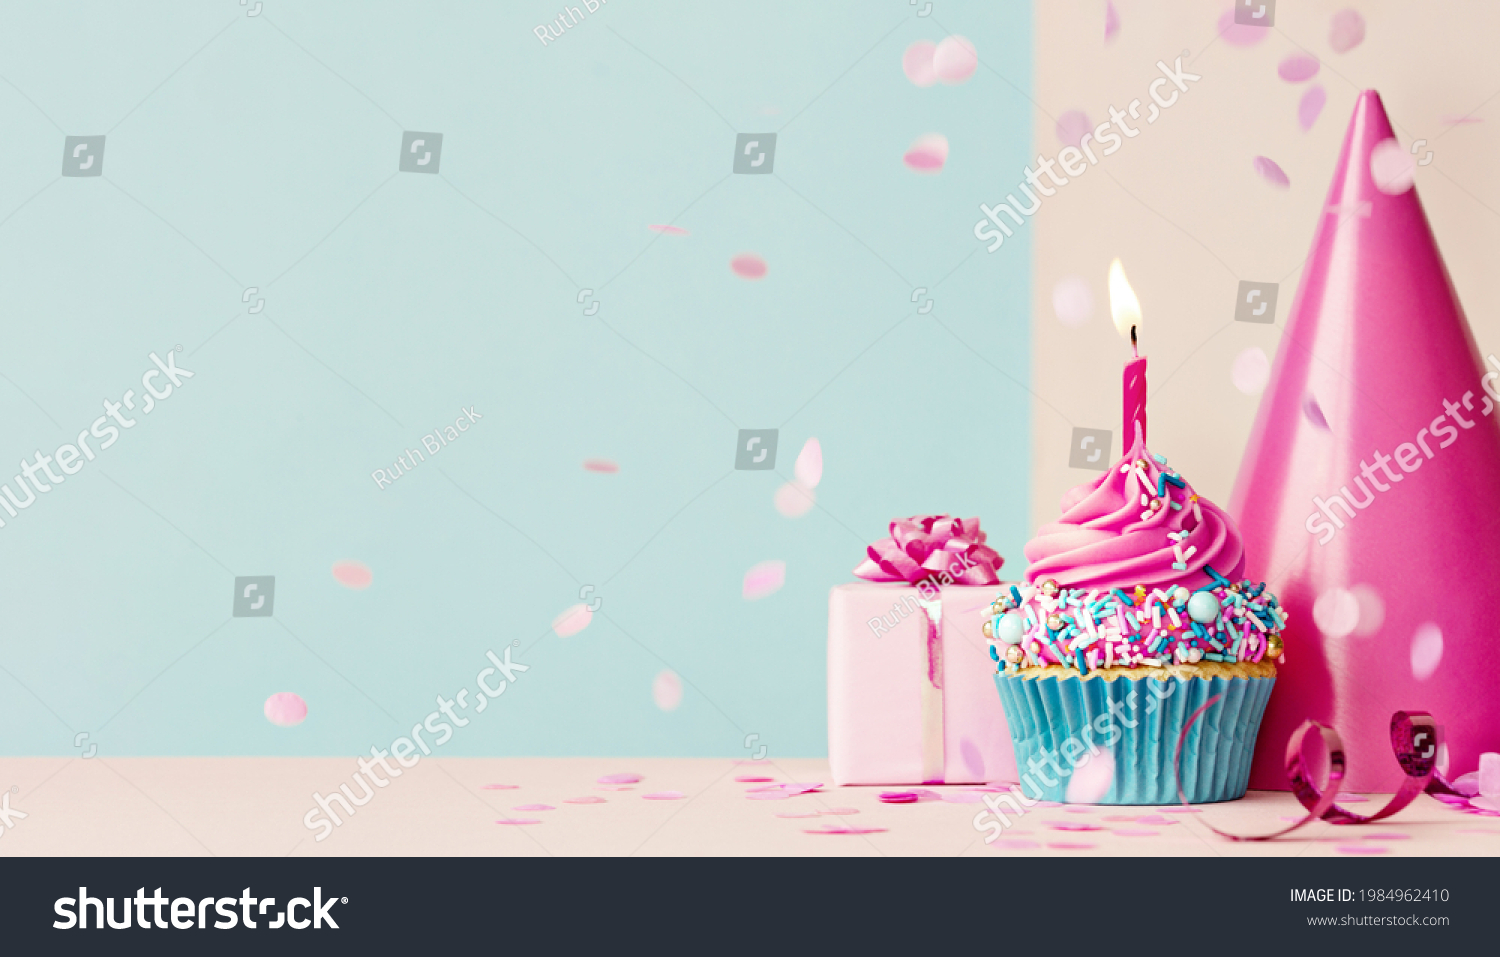 Birthday background with pink birthday cupcake and candle, birthday gift and party hat #1984962410